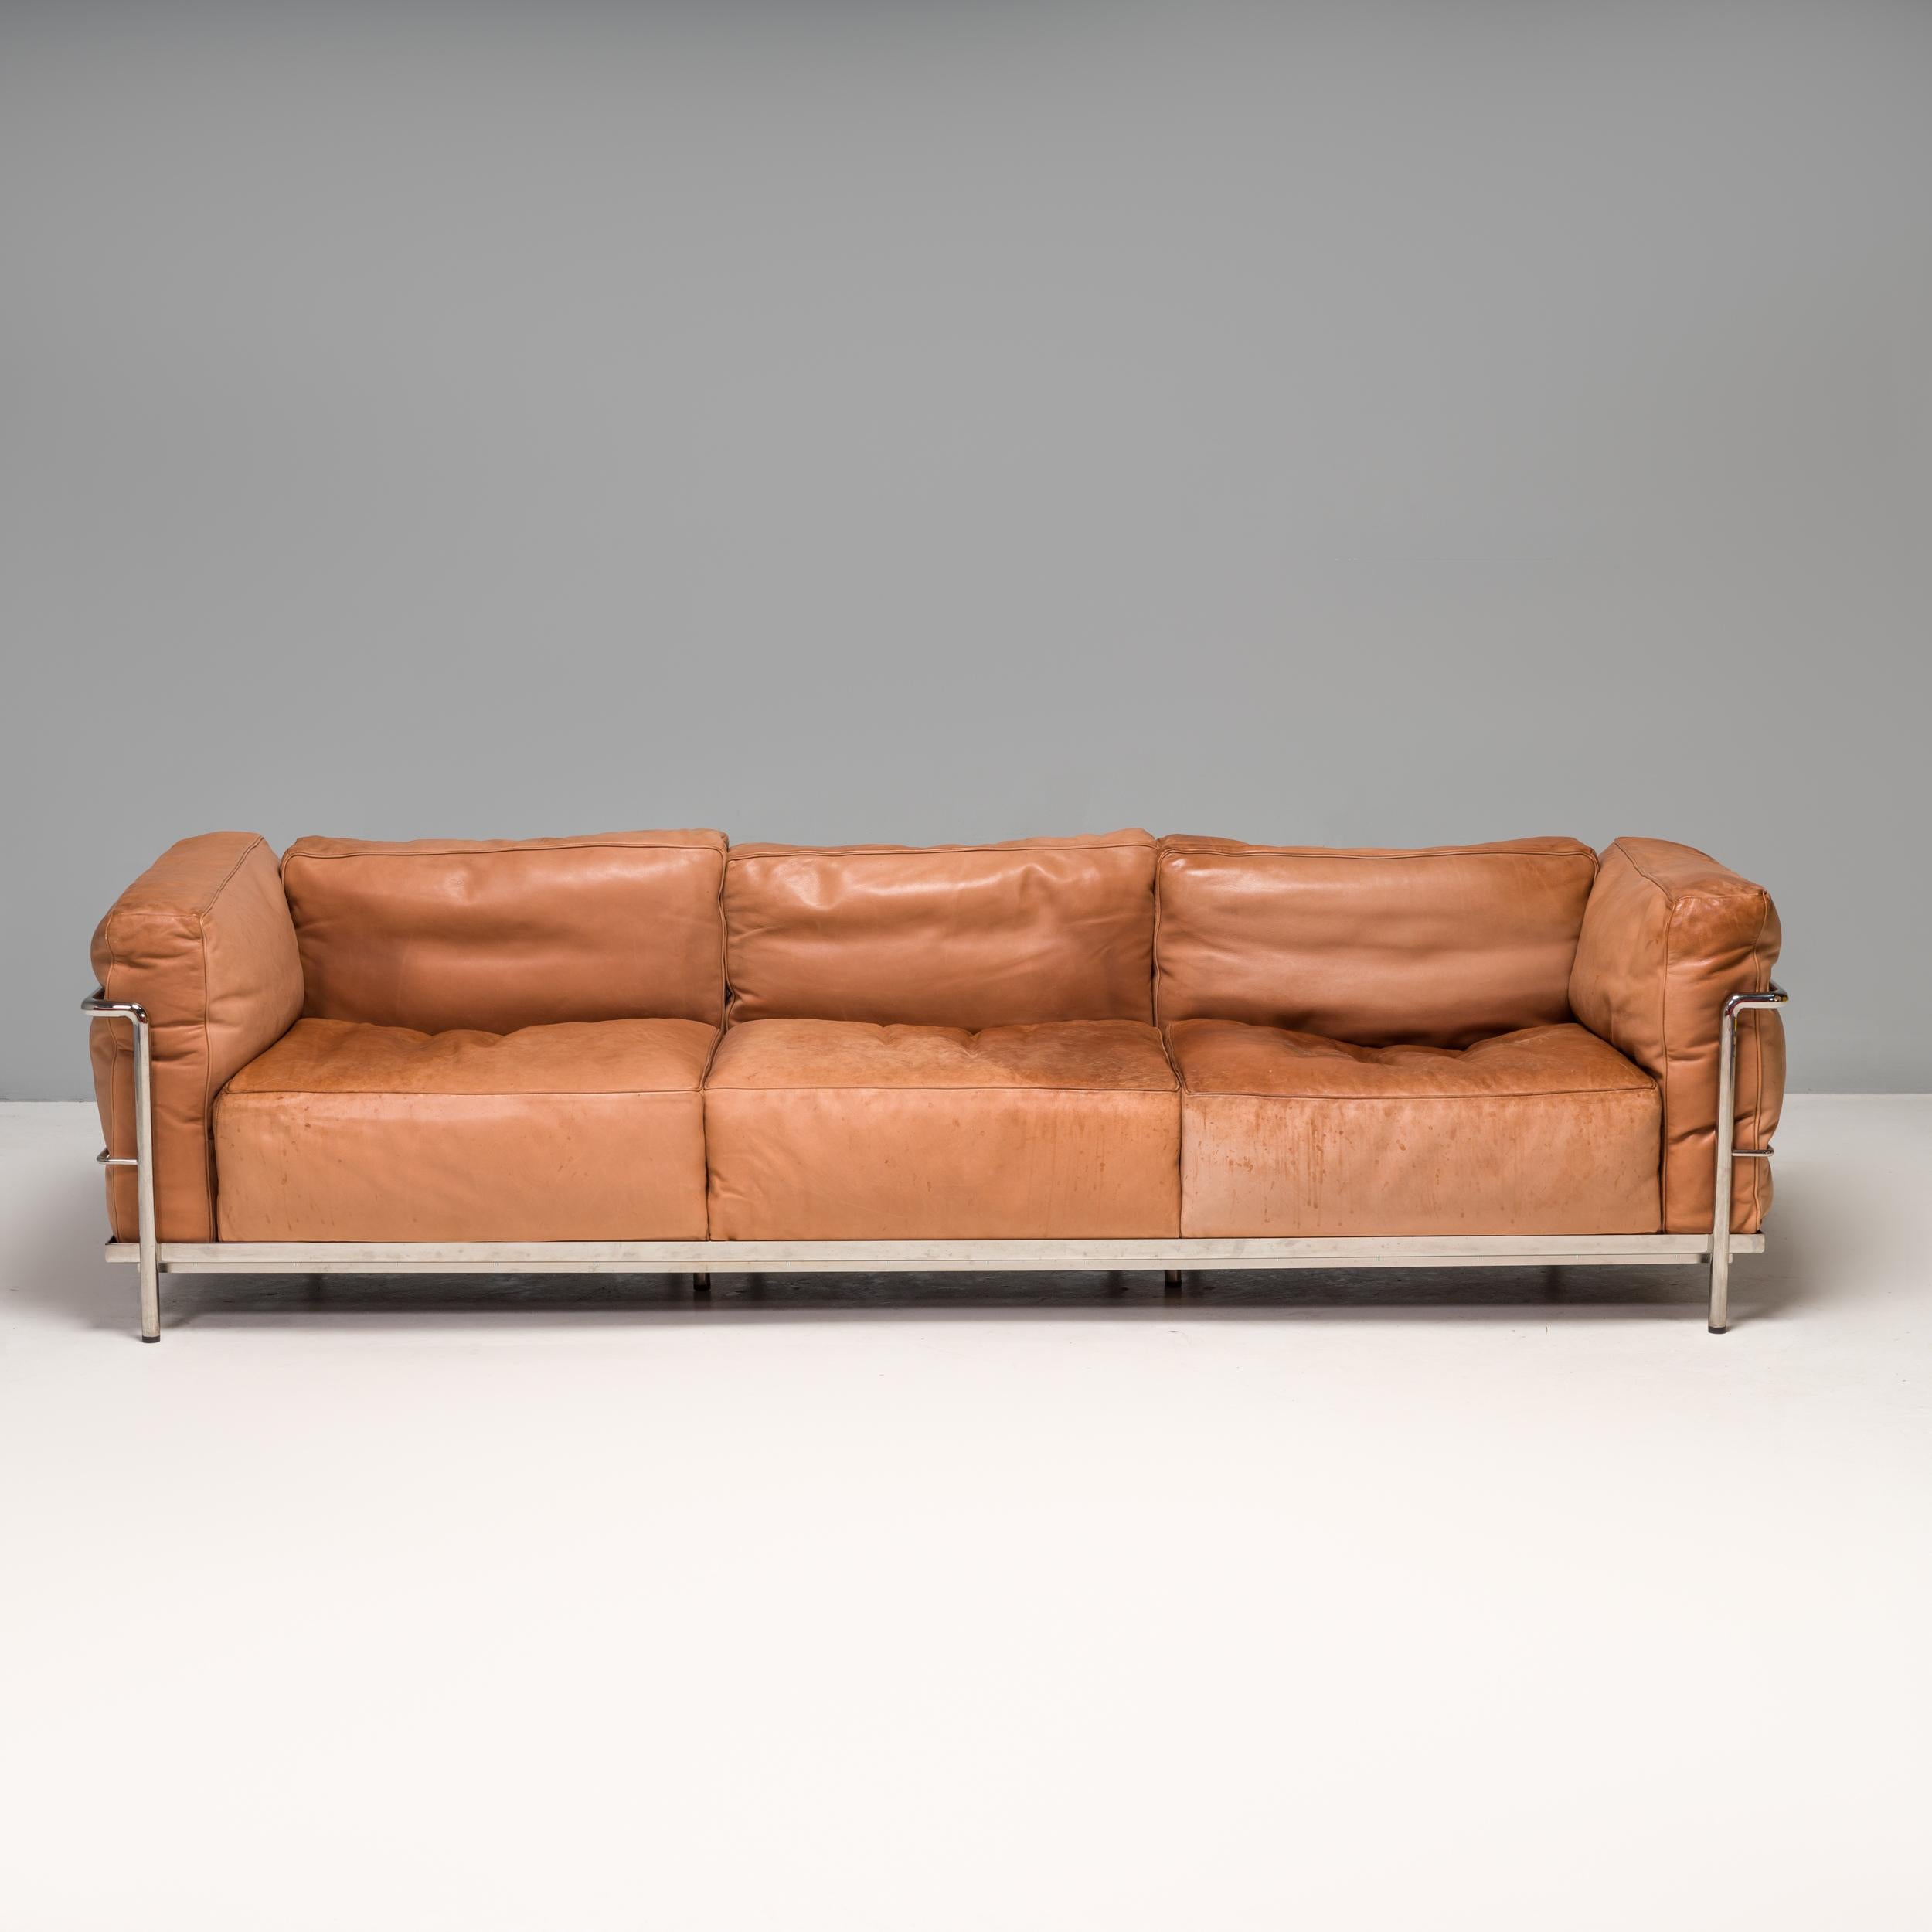 Originally designed in 1928 by Le Corbusier, Pierre Jeanneret and Charlotte Perriand, the LC3 sofa has since become a design icon and was re-issued by Cassina in 1965.

One of the first sofa designs to make a feature of the structure, the sofa has